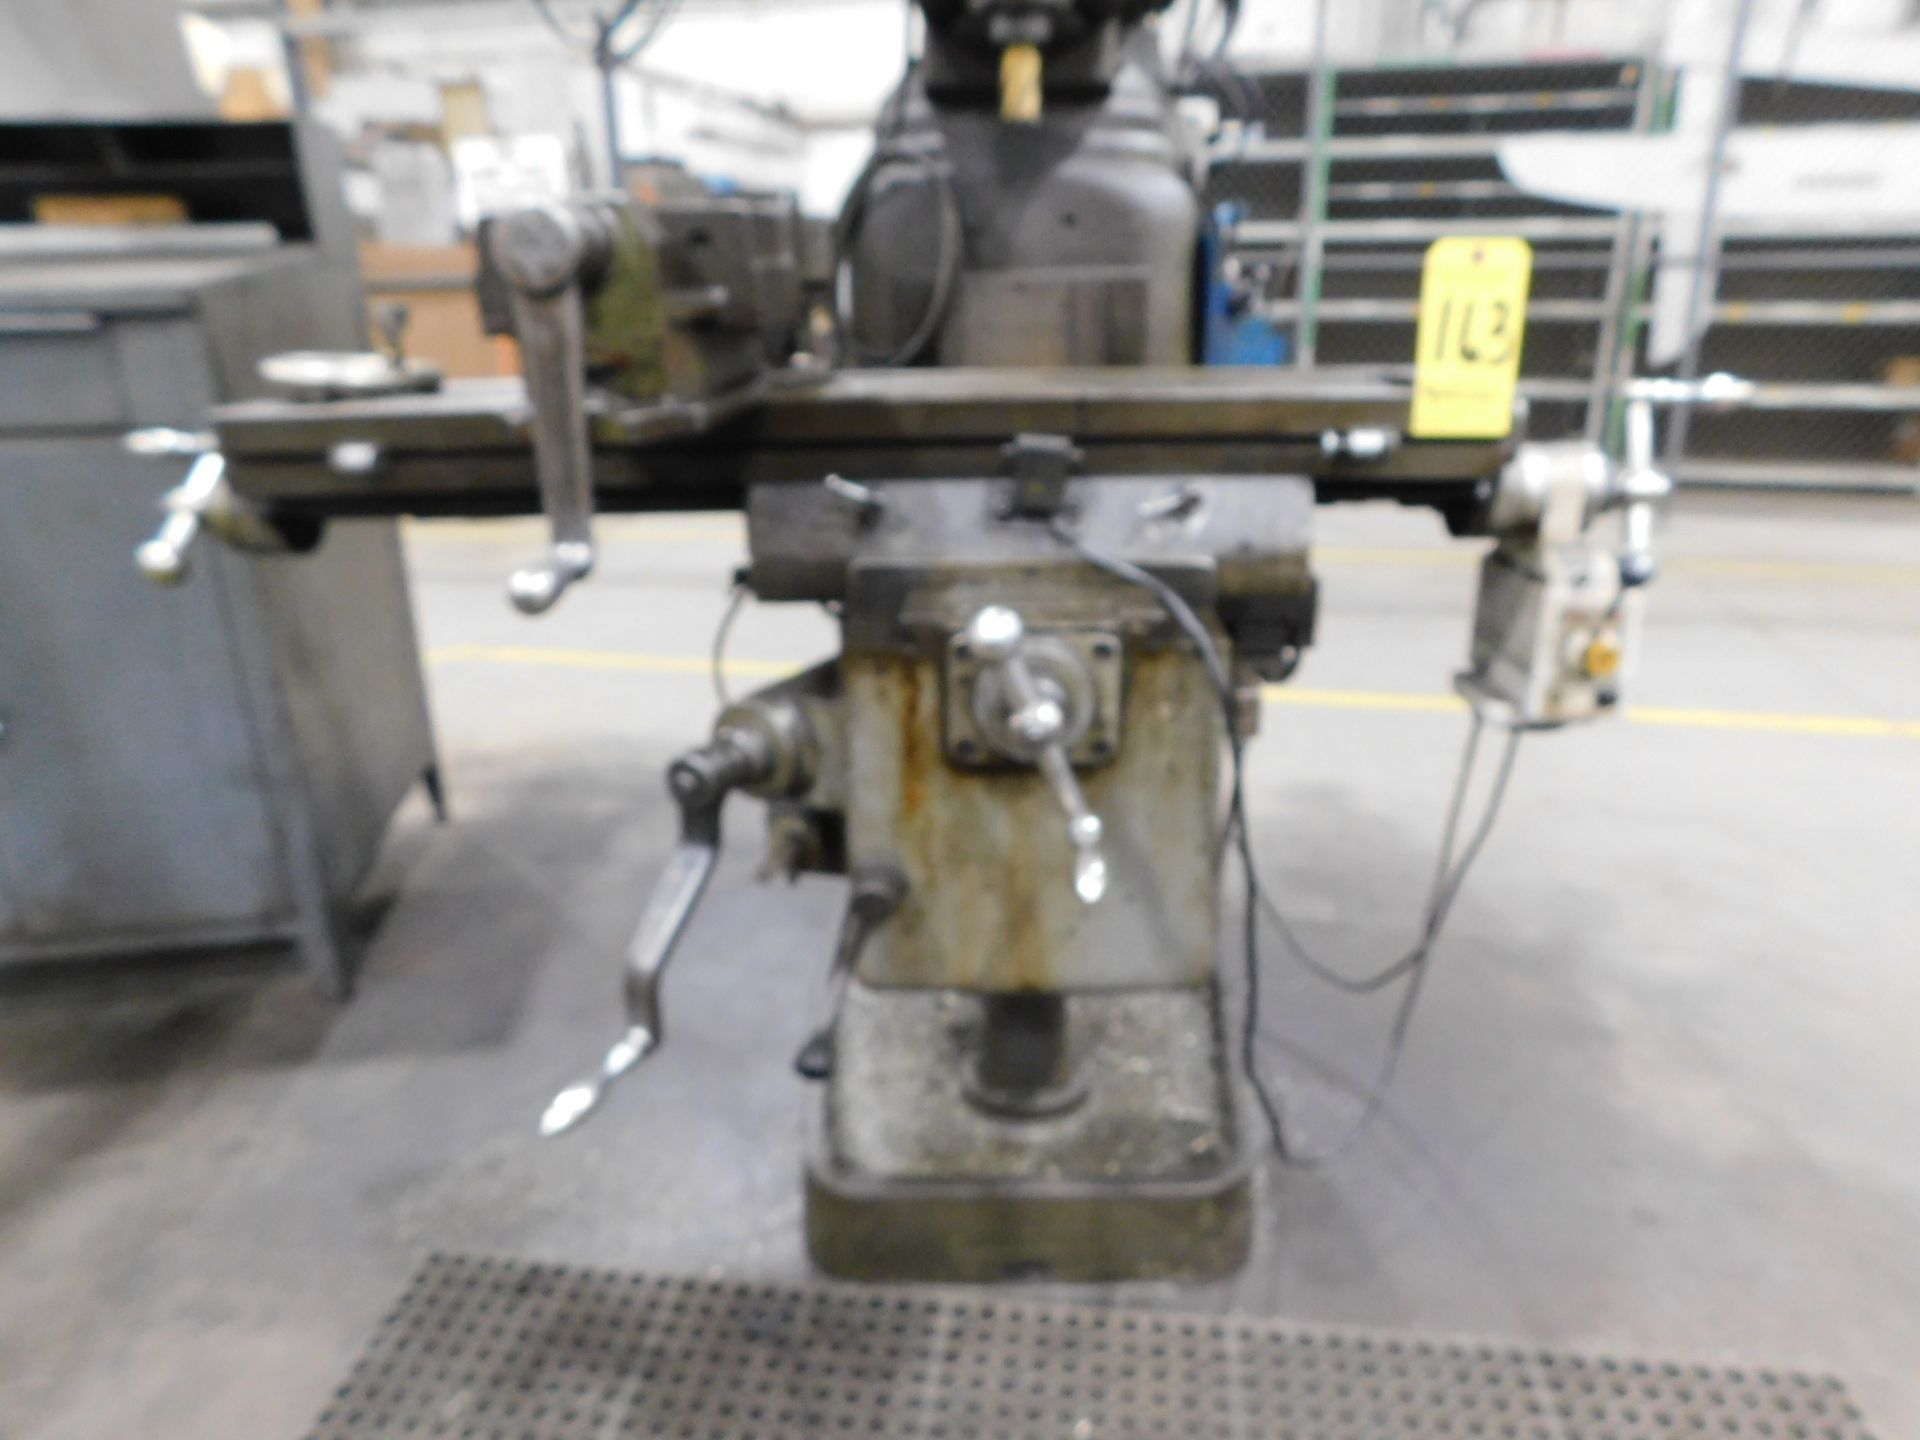 Kondia Step Pulley Vertical Mill, s/n F-465, 9" X 42" Table, Table Powerfeed, Trak D.R.O., 8" Mill - Image 9 of 11